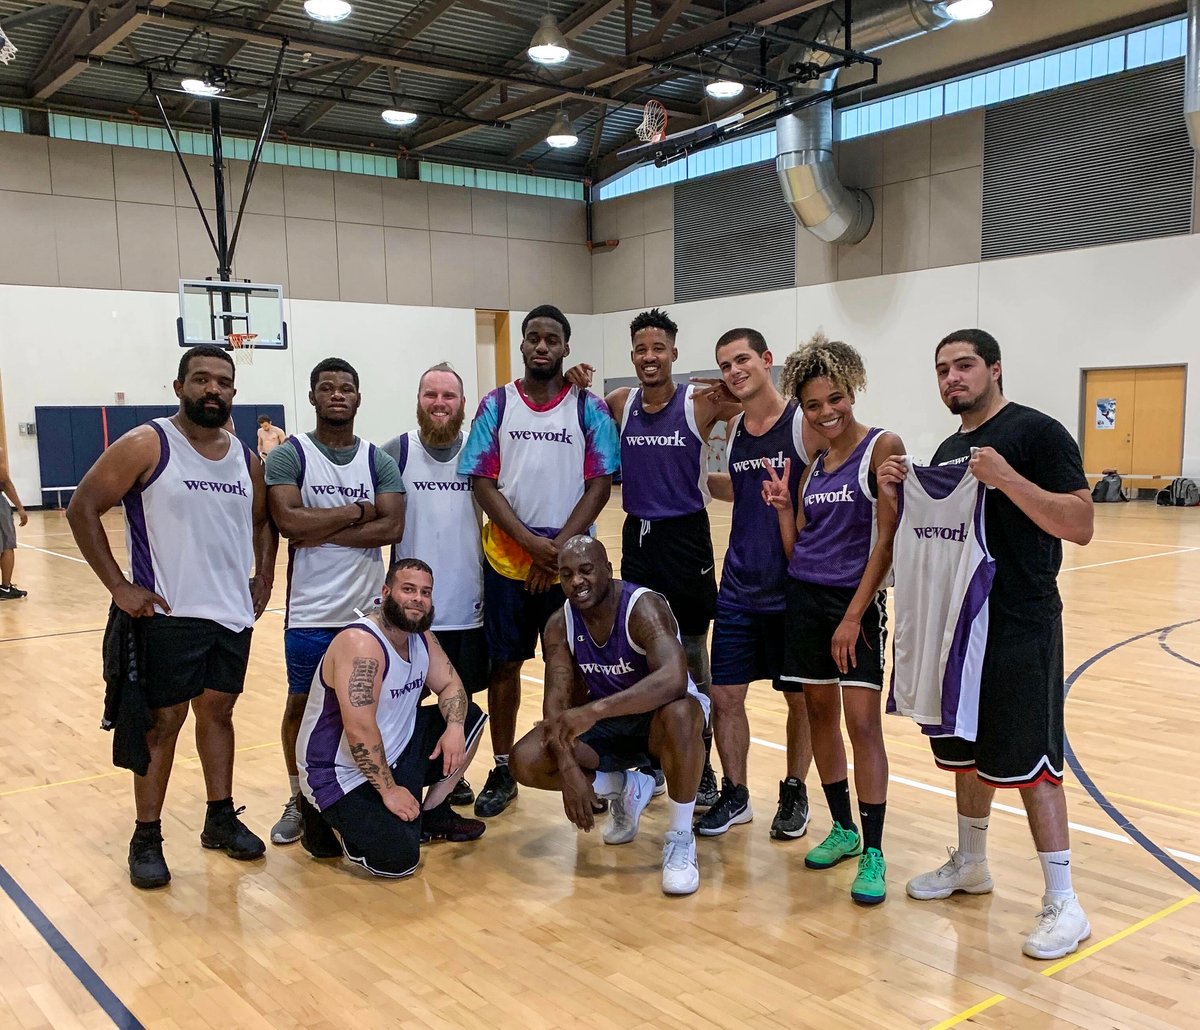 Co-Workers Use Basketball Event to Promote Diversity